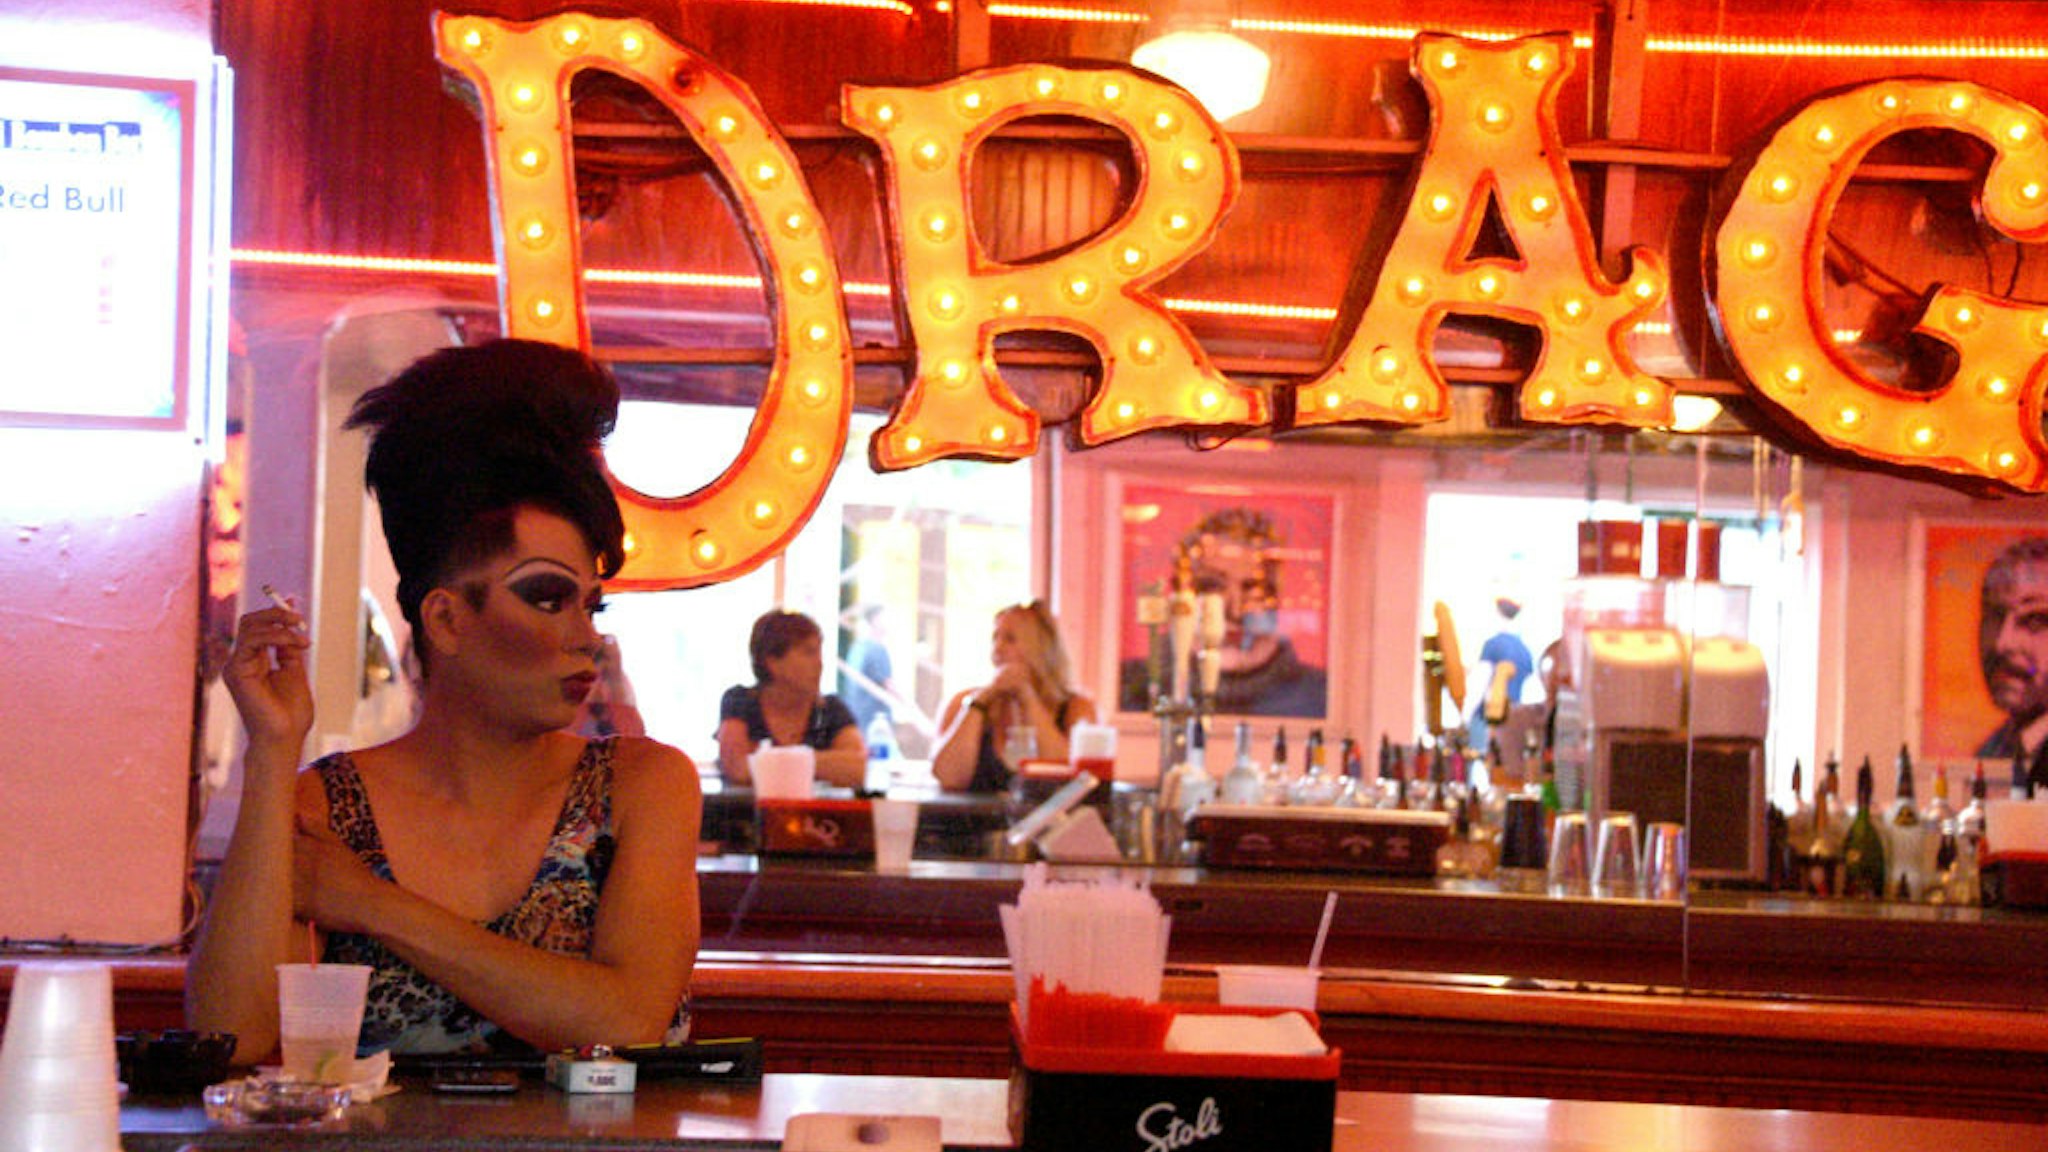 KEY WEST FL - MARCH 23: A Drag Queens sits in the 801 Bourbon Bar a Nightclub, a gay bar &amp; lively mix of drag shows.The tourist scene is very mixed and liberal on Duval Street welcoming the LGBTQ community March 23, 2019 801 Bourbon Bar Key West, Florida (Photo by Paul Harris/Getty Images)